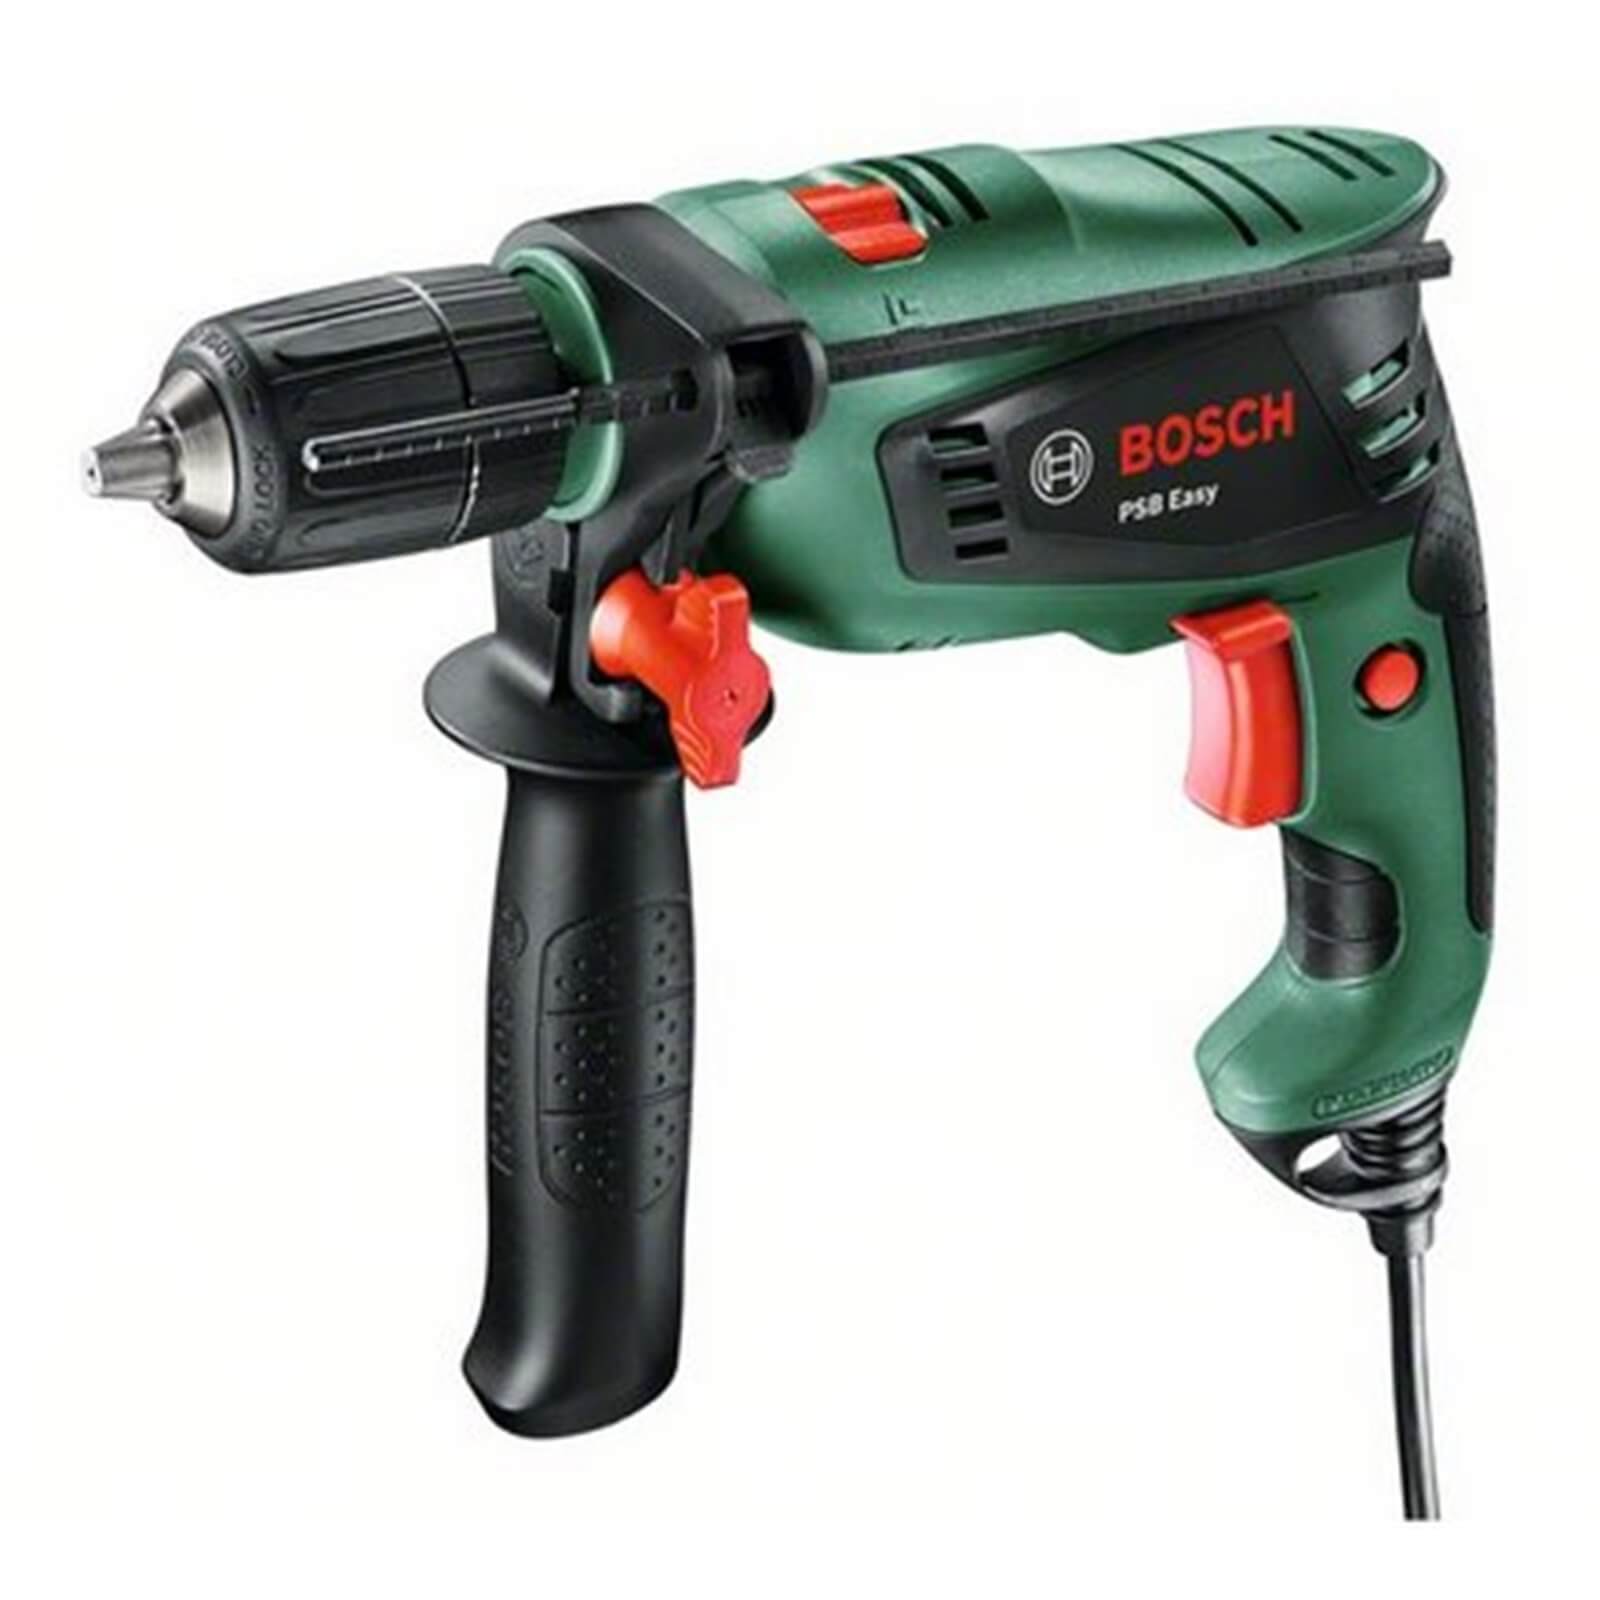 Photo of Bosch Easyimpact 550 Corded Hammer Drill